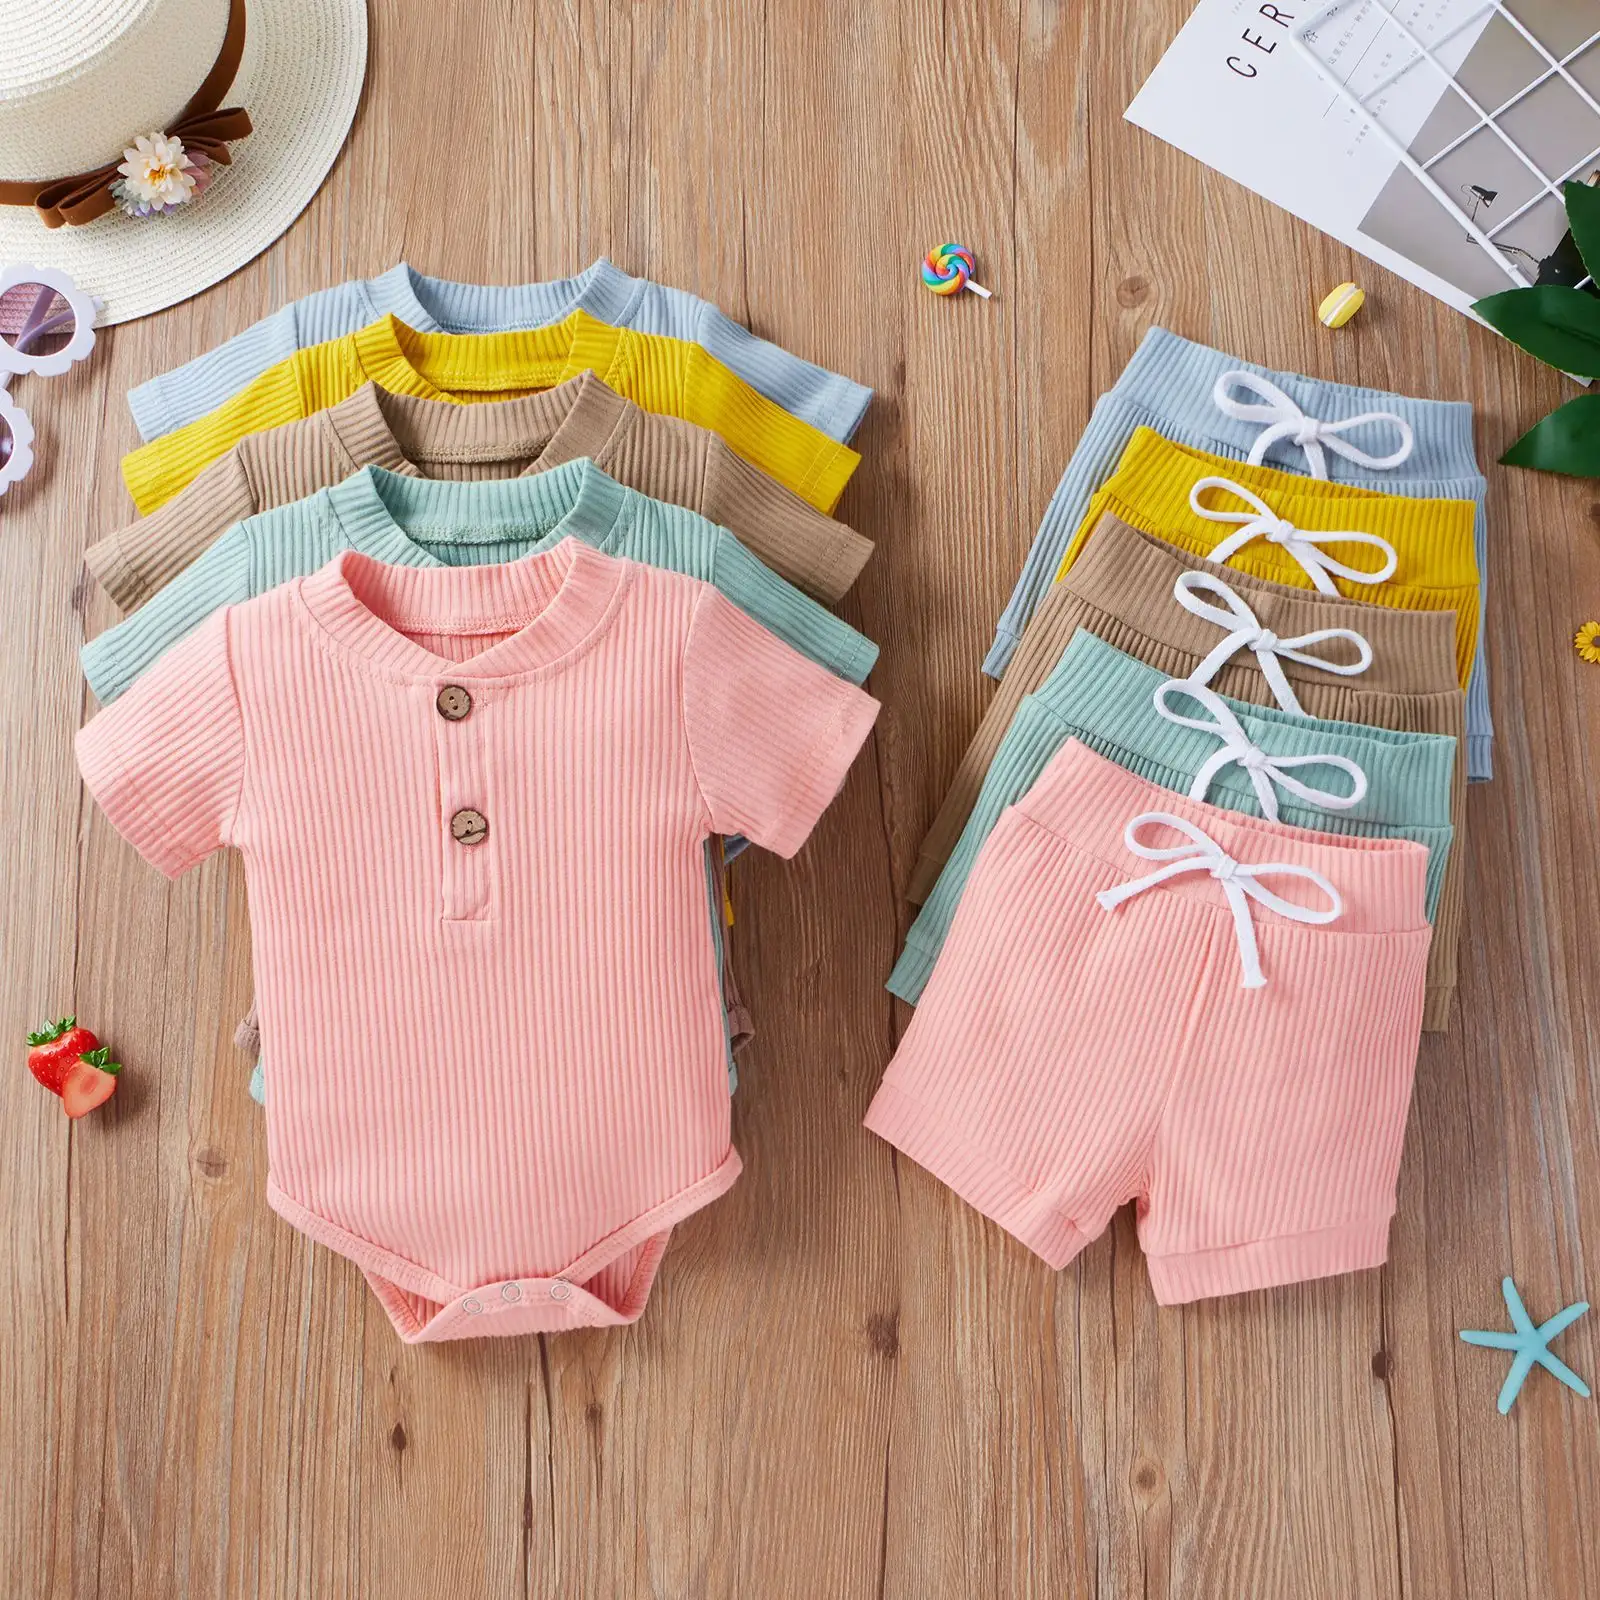 Spring And Summer Men And Women Baby Leisure Home Infant Clothes Suit Snap Button Short Sleeve Shorts Set